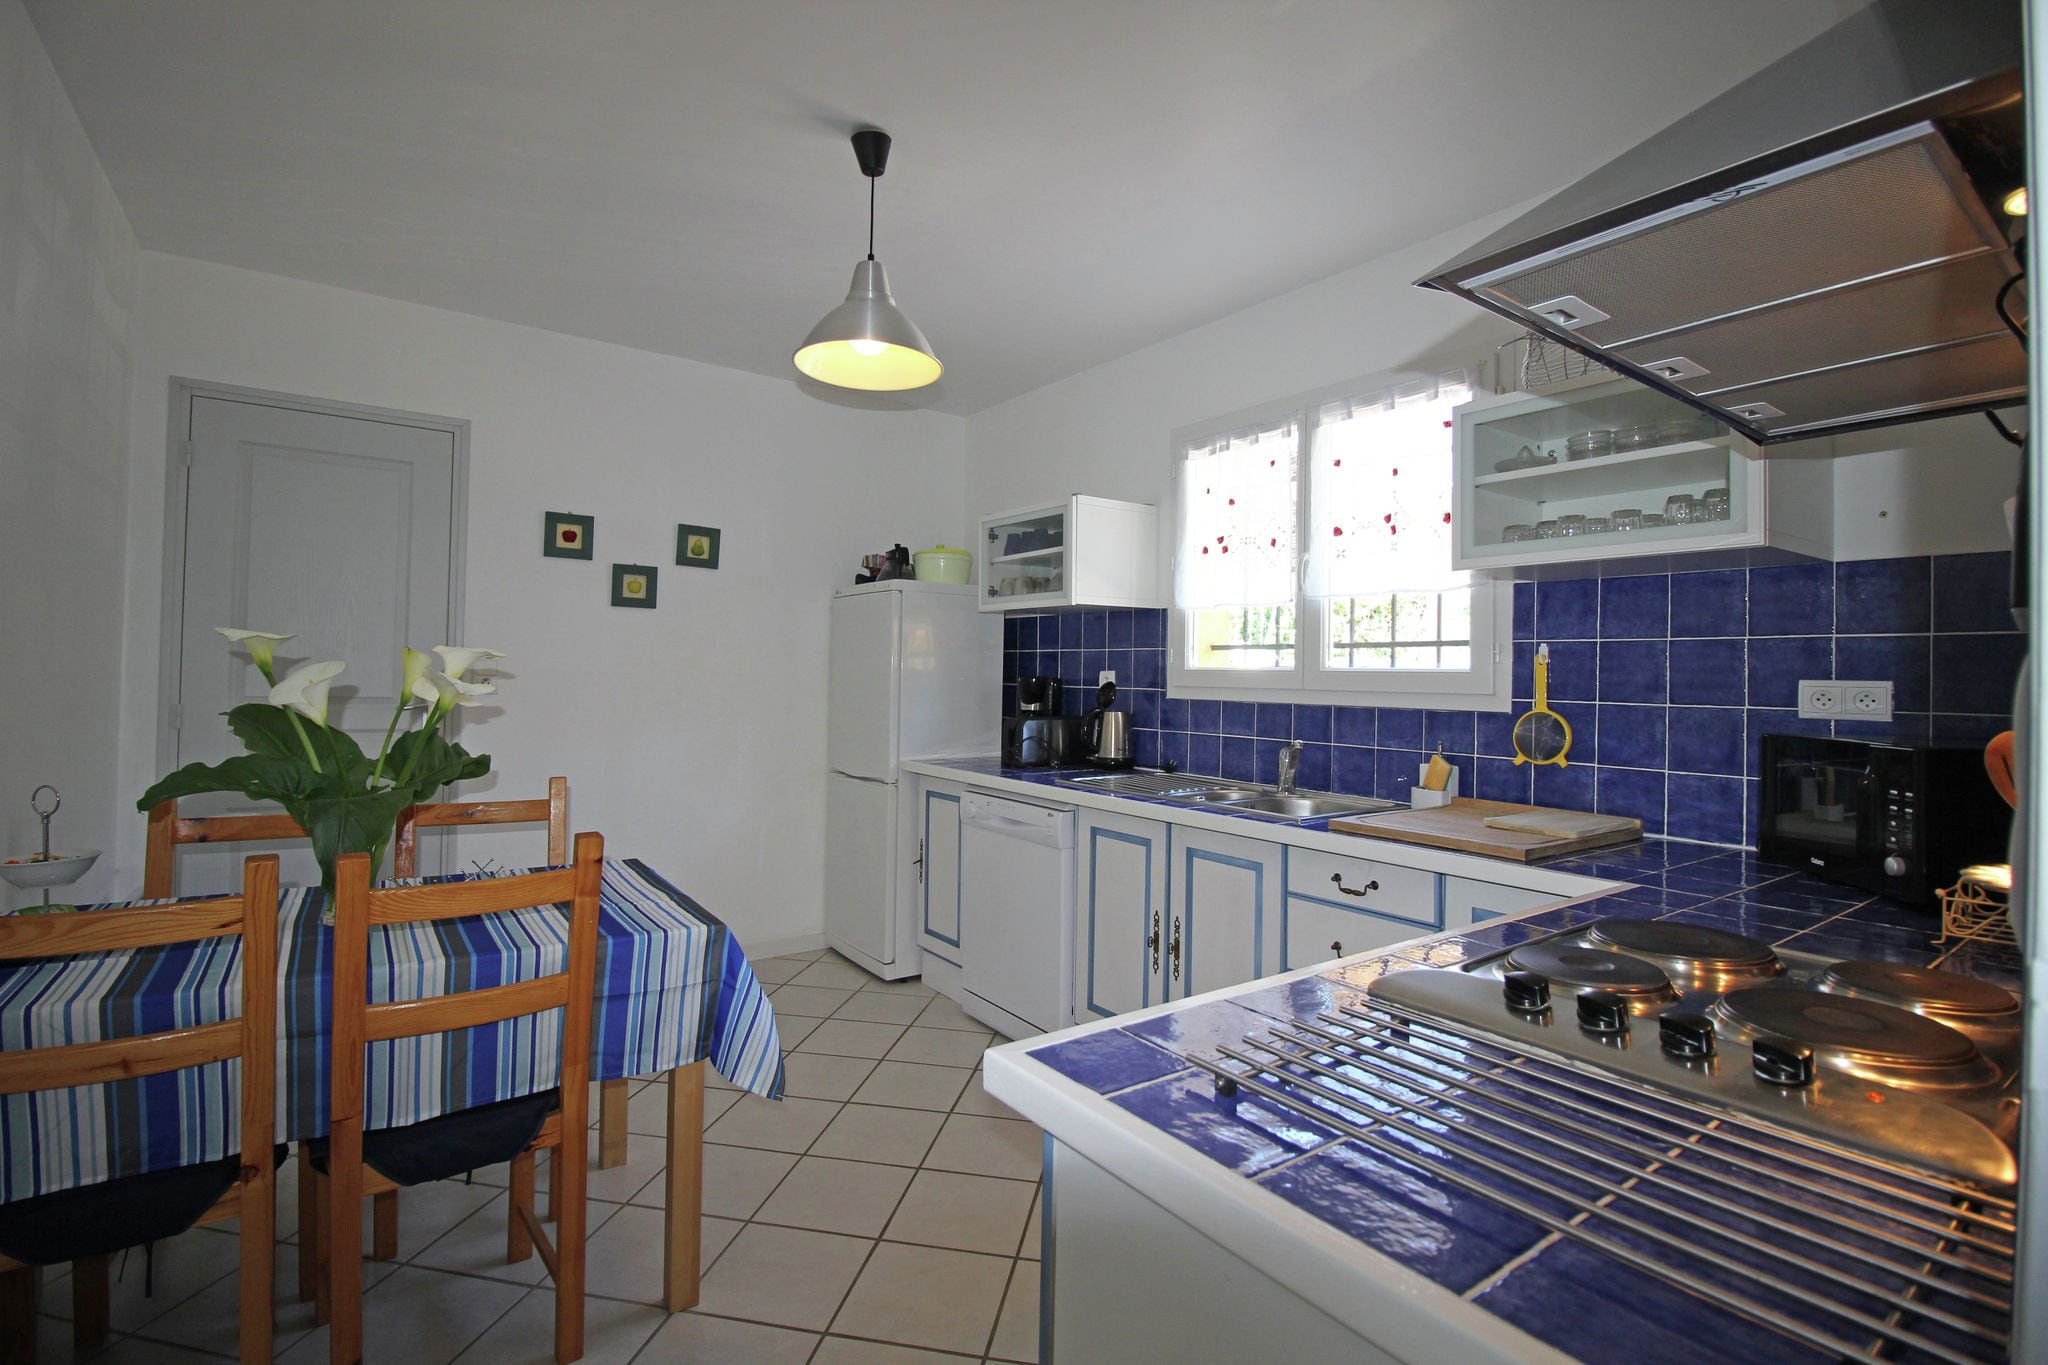 Detached villa with private pool and beautiful garden, 25km from sea and beach